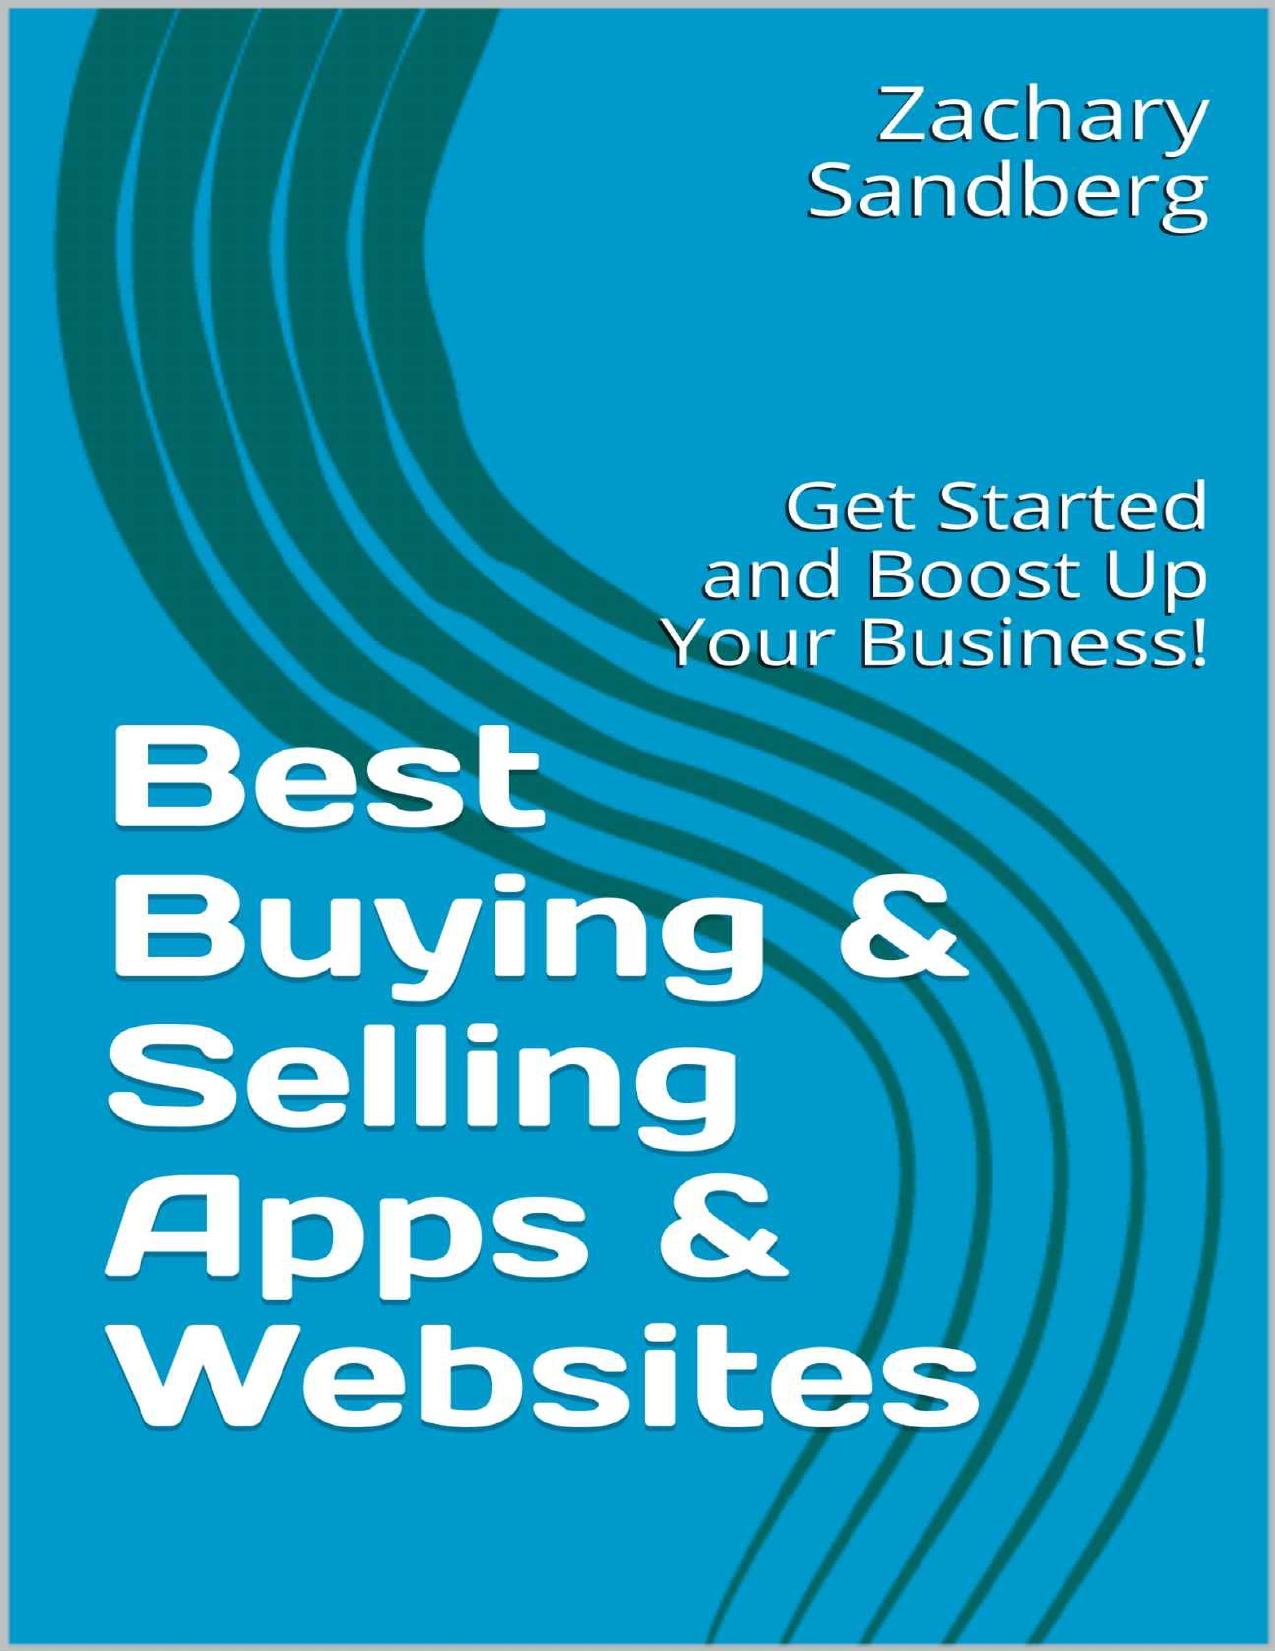 Best Buying & Selling Apps & Websites: Get Started and Boost Up Your Business! by Zachary Sandberg